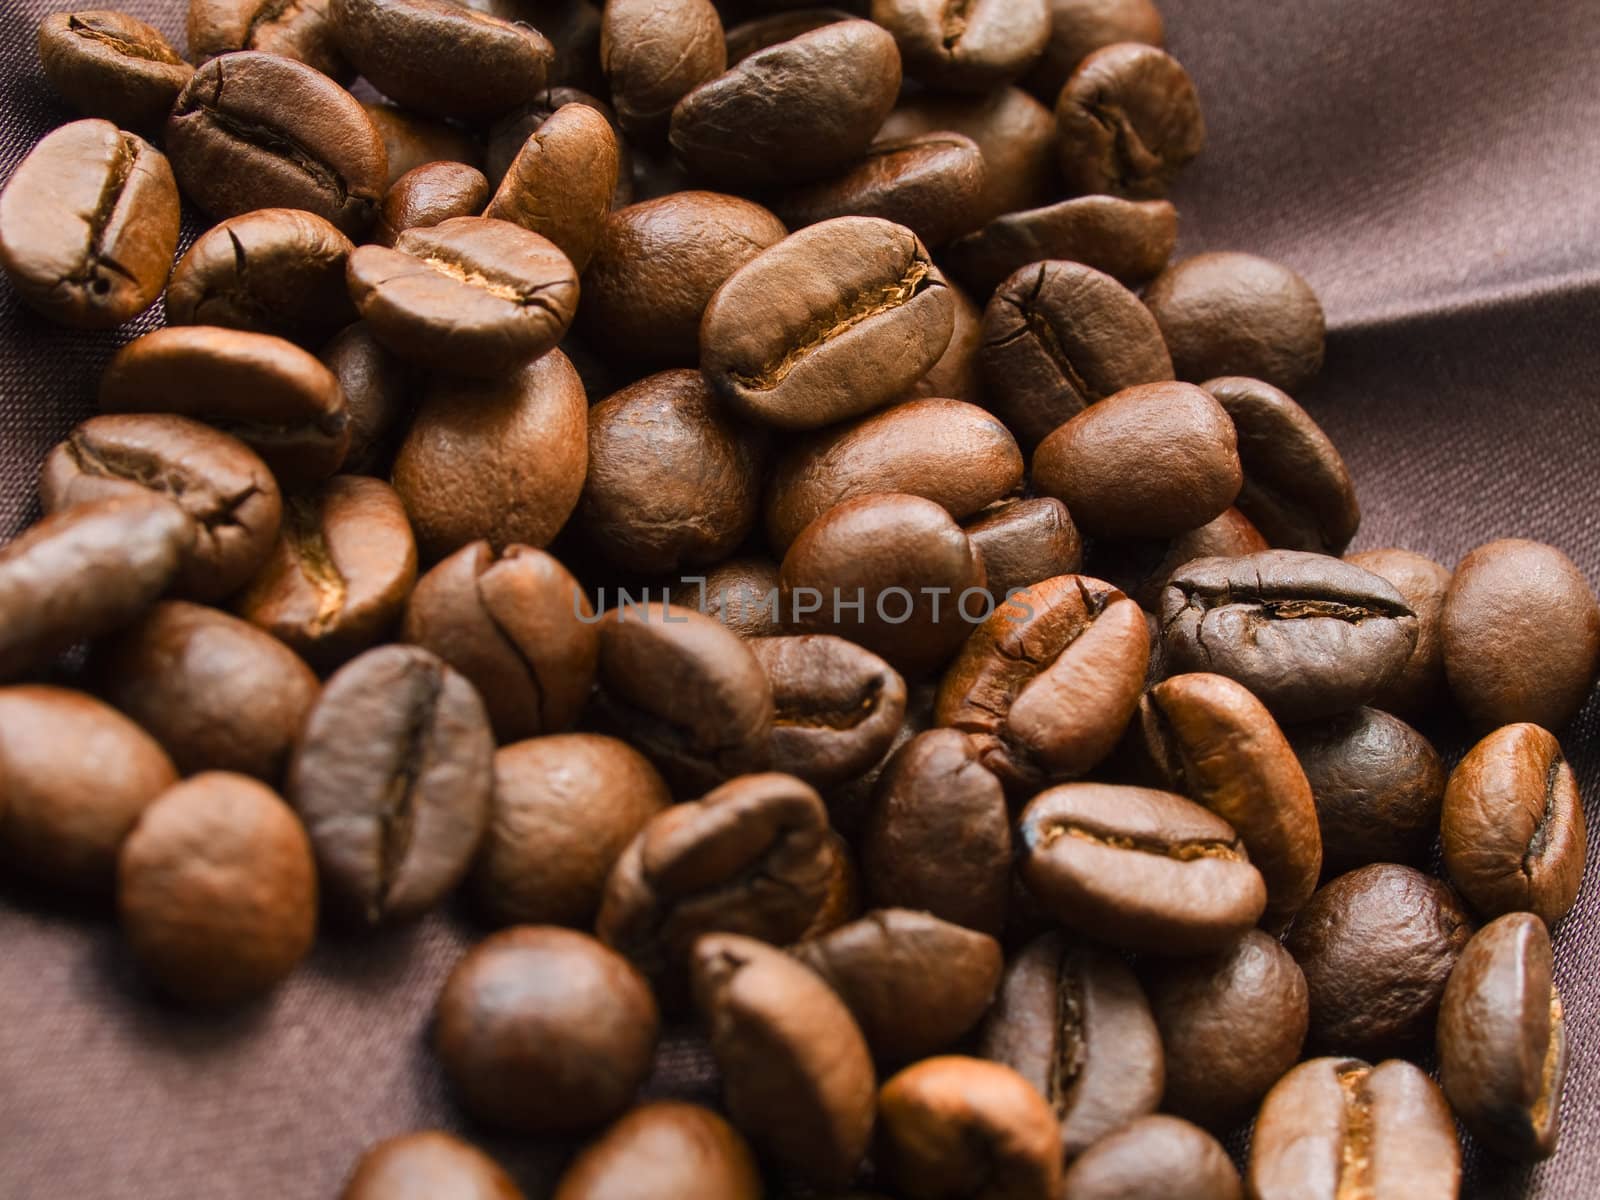 Roasted coffee beans by kvinoz